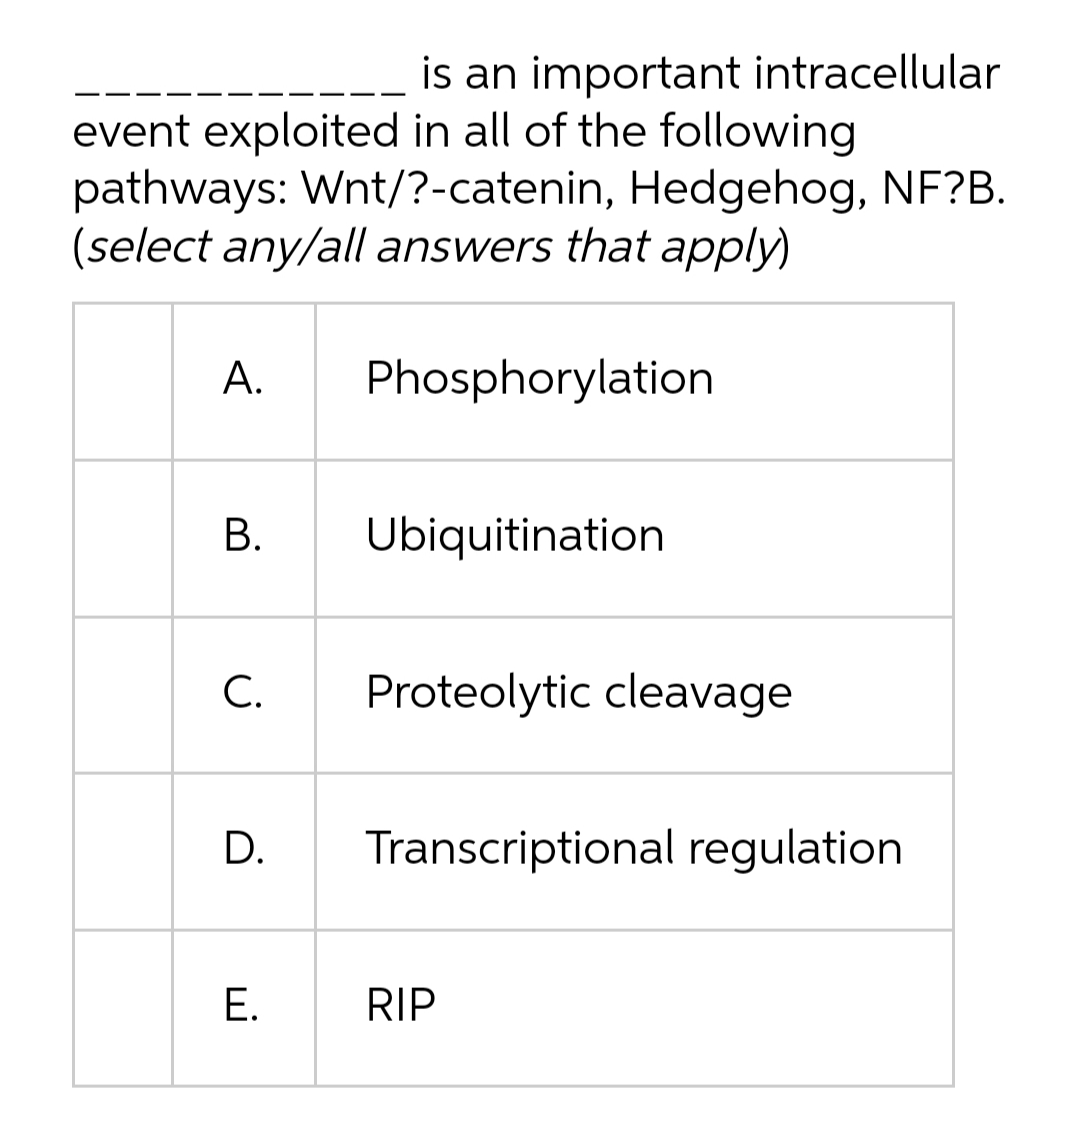 is an important intracellular
event exploited in all of the following
pathways: Wnt/?-catenin, Hedgehog, NF?B.
(select any/all answers that apply)
А.
Phosphorylation
В.
Ubiquitination
С.
Proteolytic cleavage
D.
Transcriptional regulation
Е.
RIP
